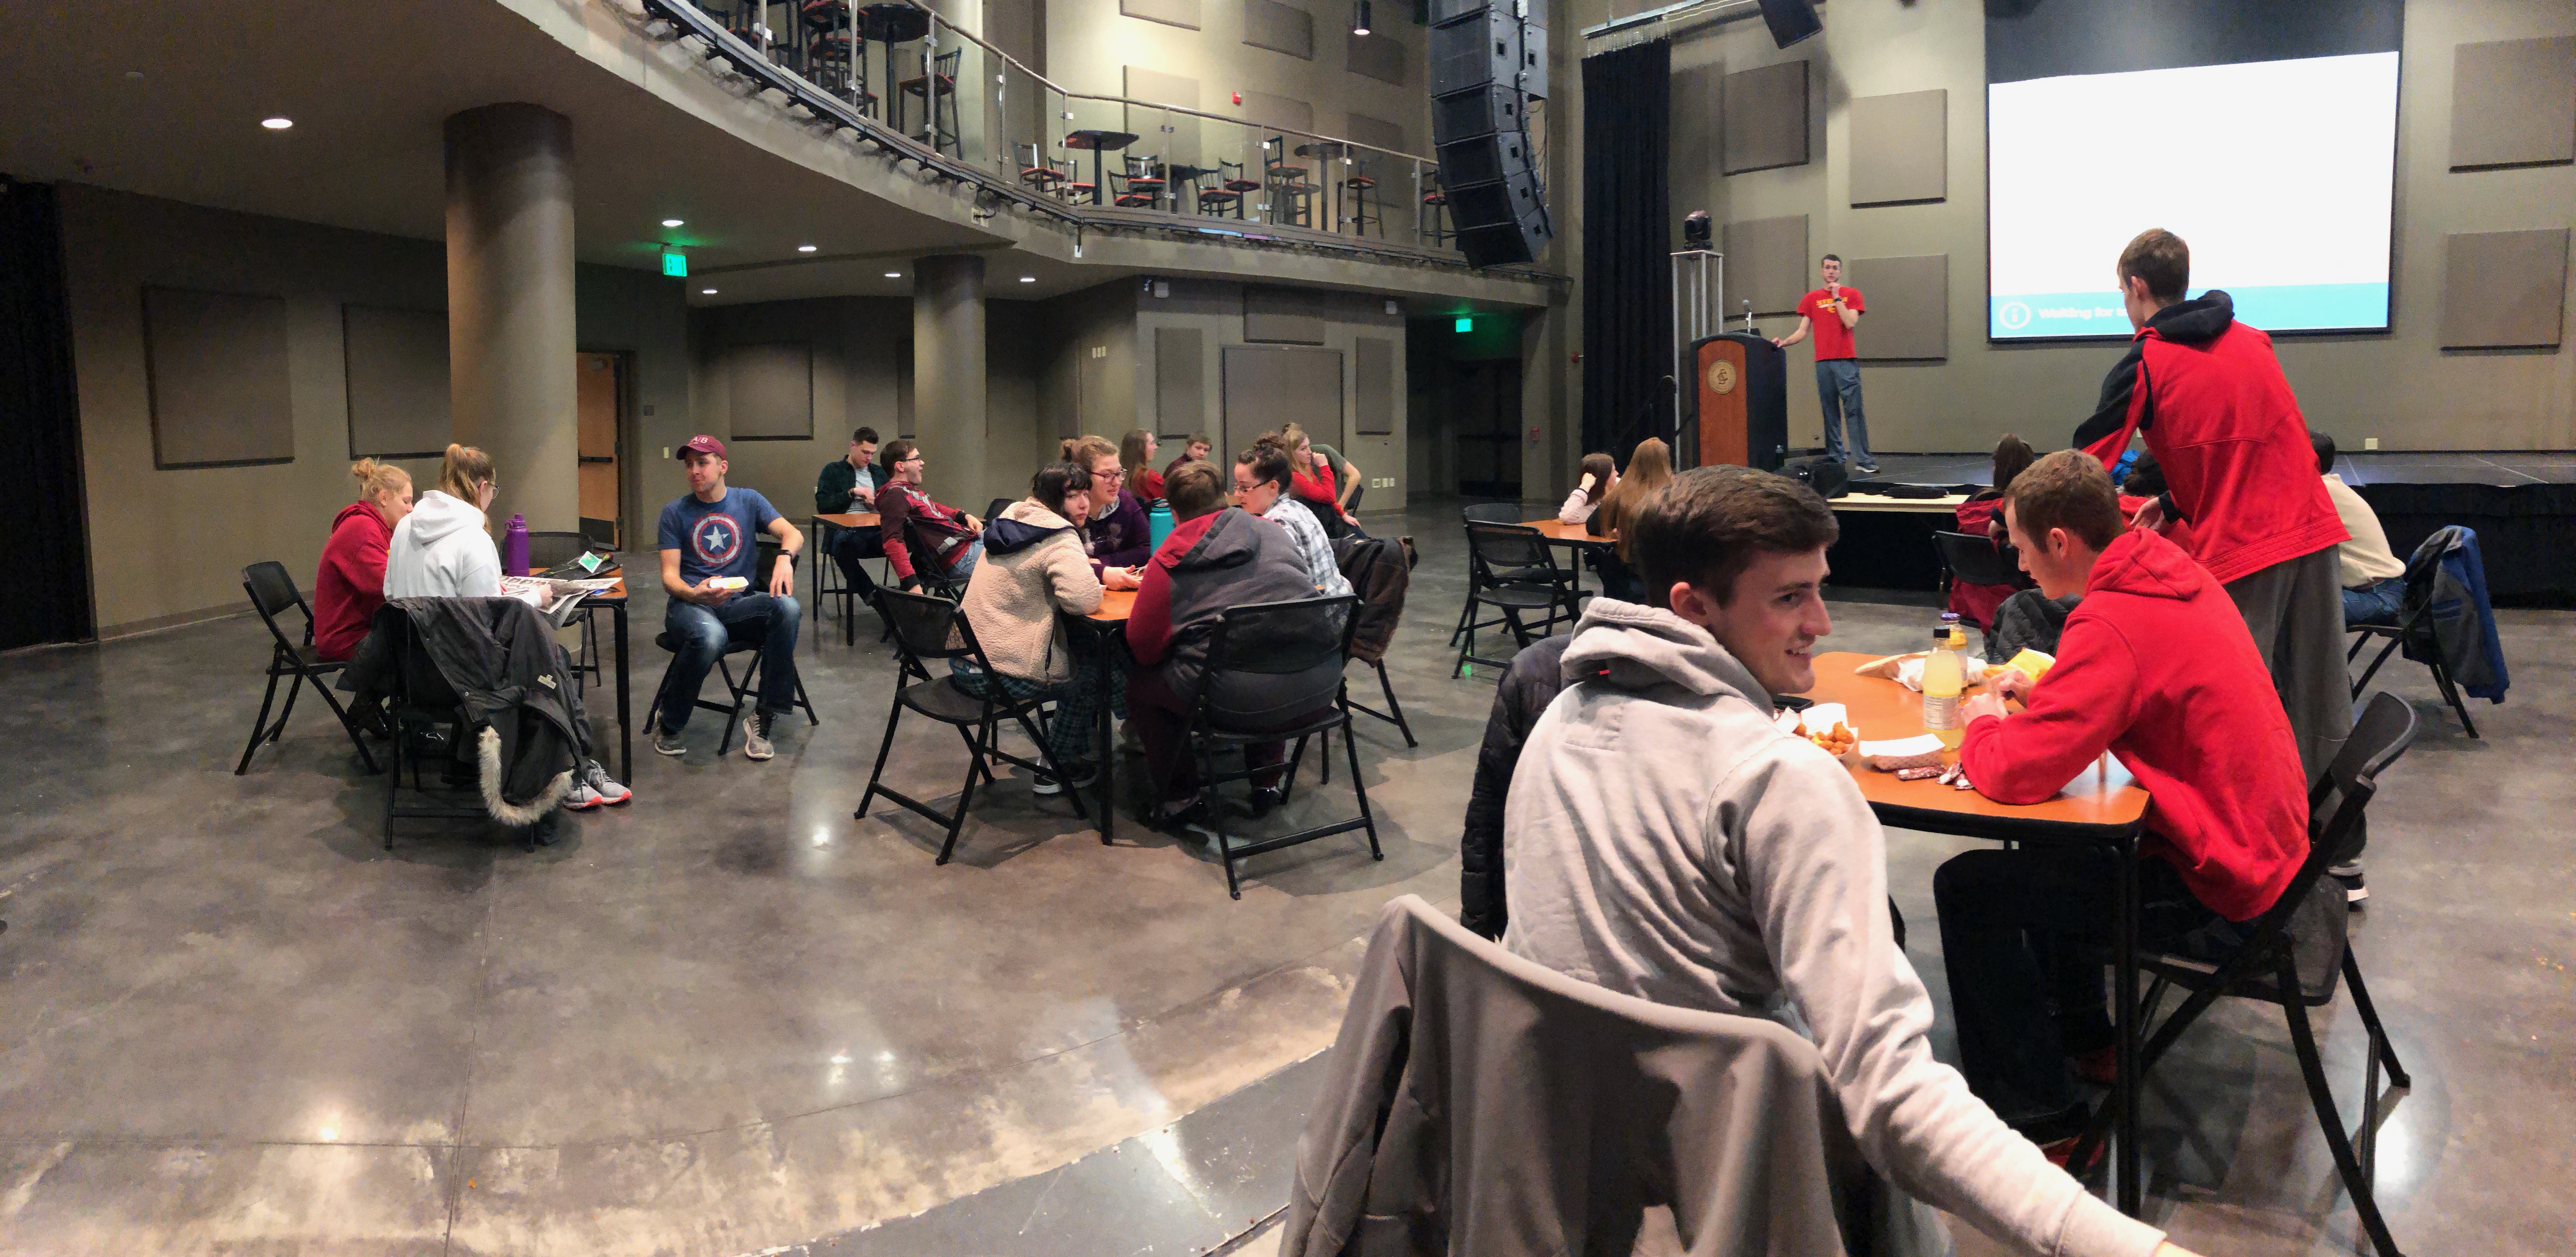 Pictured: Teams prepare as the Iowa History Center Trivia event begins on February 19, 2019